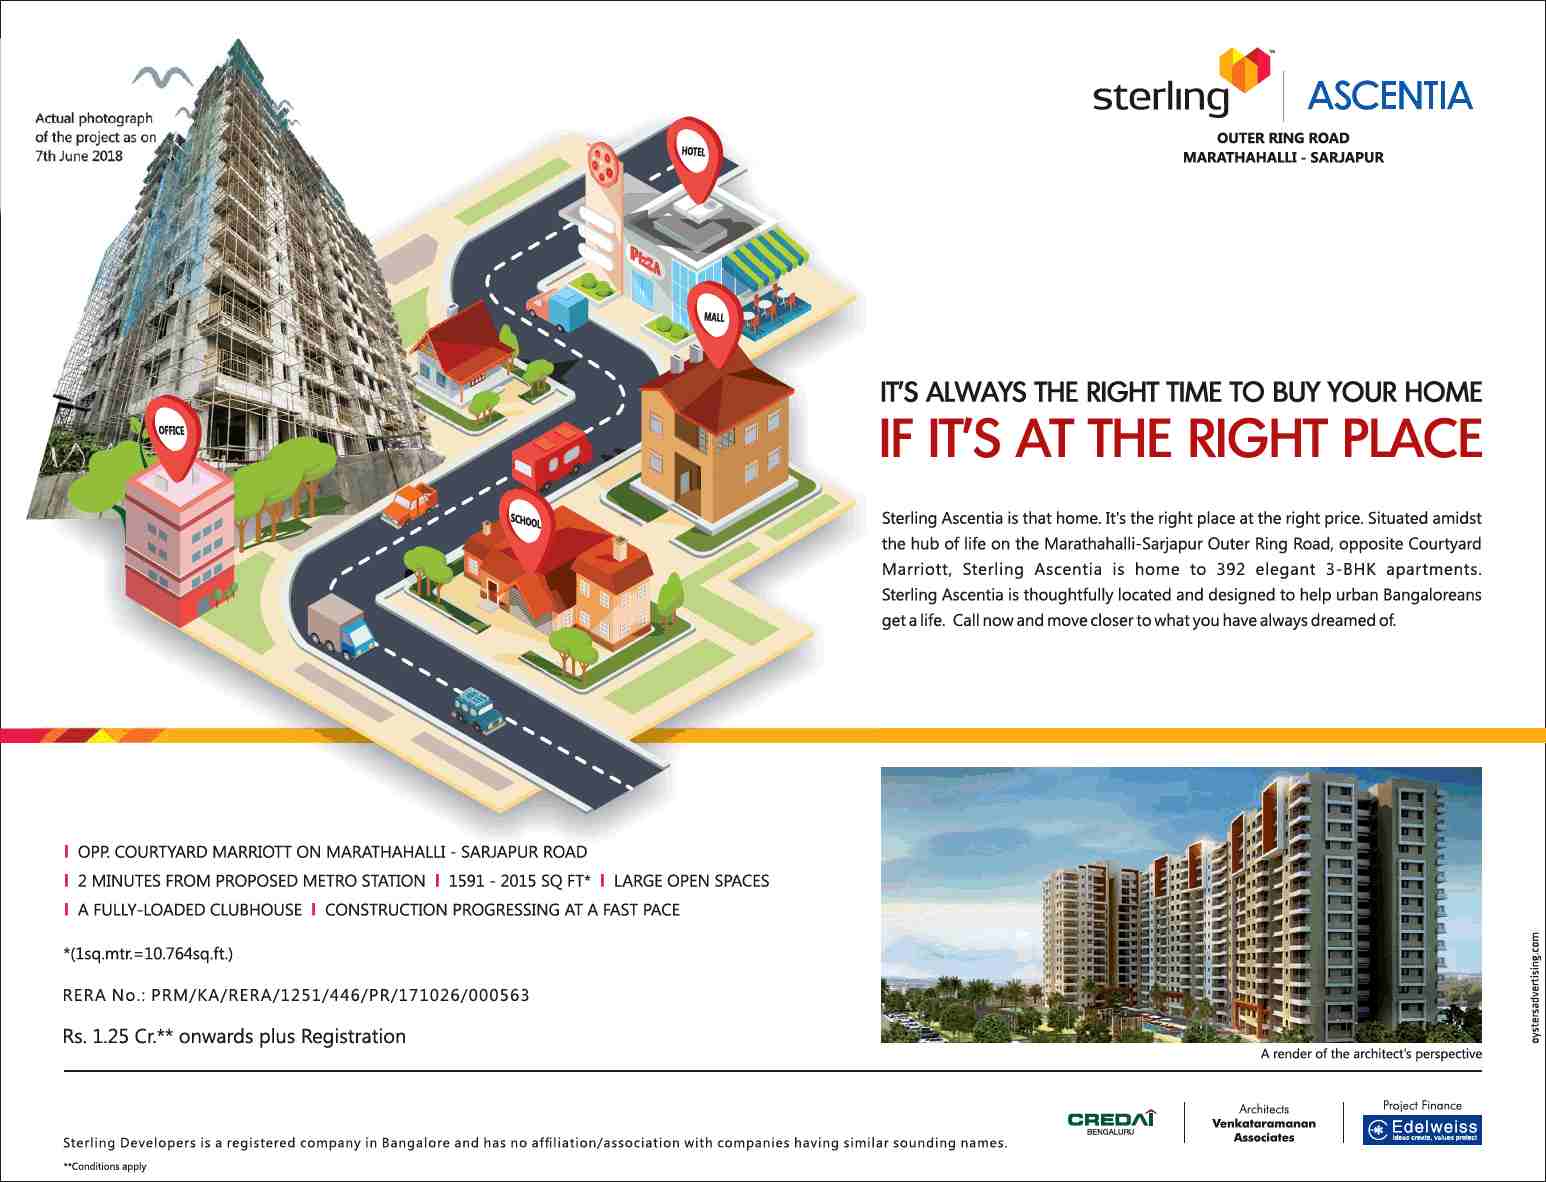 Book elegant homes starting at Rs. 1.25 cr. at Sterling Ascentia in Bangalore Update